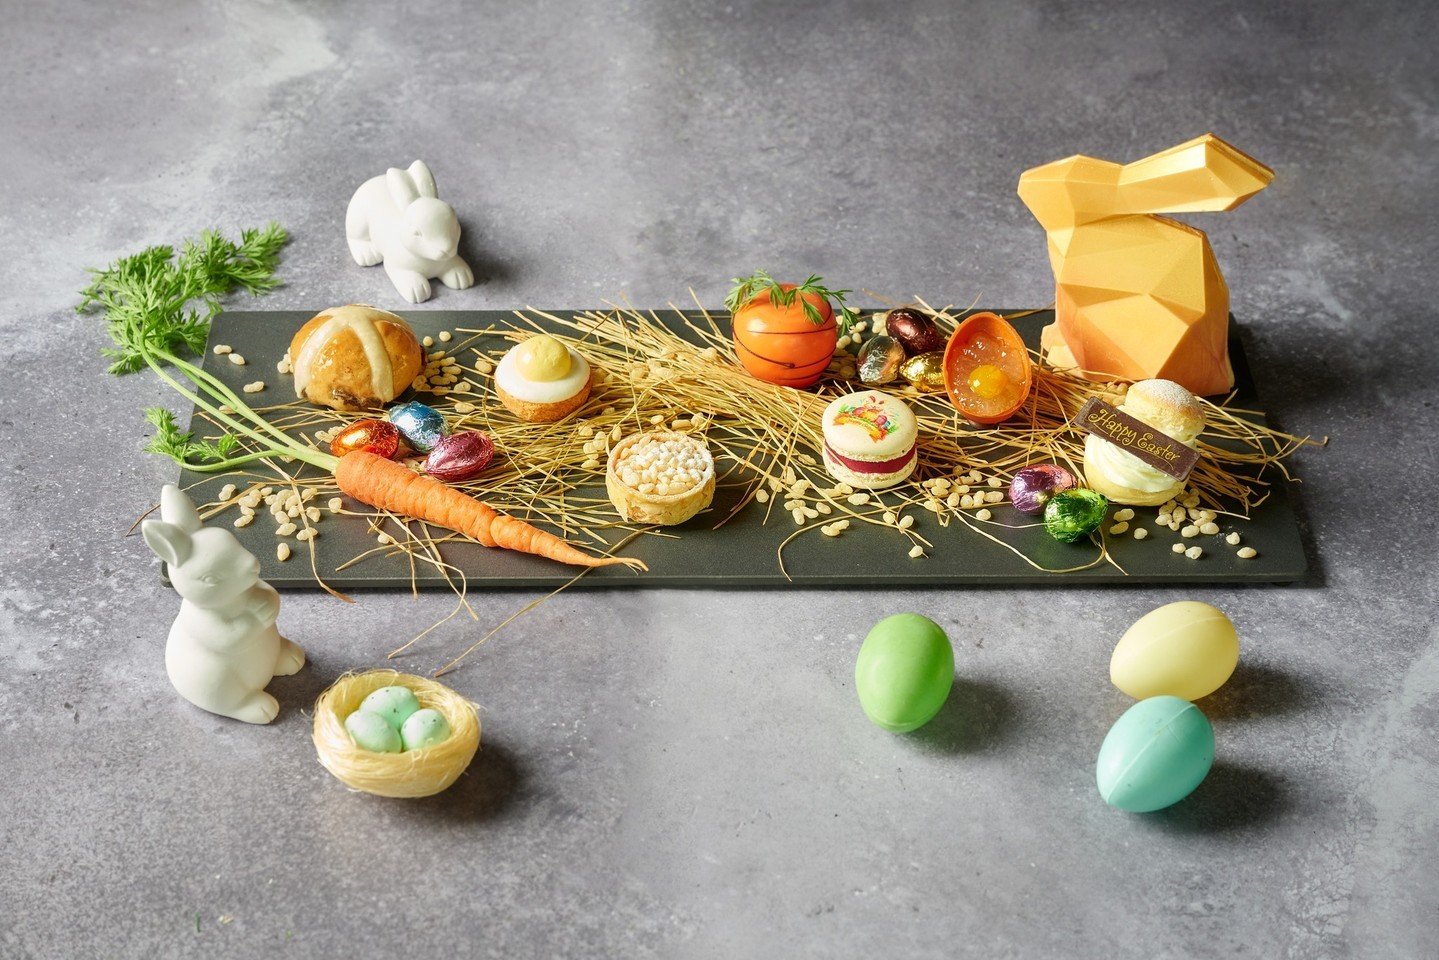 Join us for an unforgettable Easter Brunch on 30 March at SKAI, where you can create cherished memories with your loved ones.⁣⁣⁣
⁣⁣
Indulge in a delectable array of festive delights, including fresh seafood, succulent roasted meats, and delightful sw